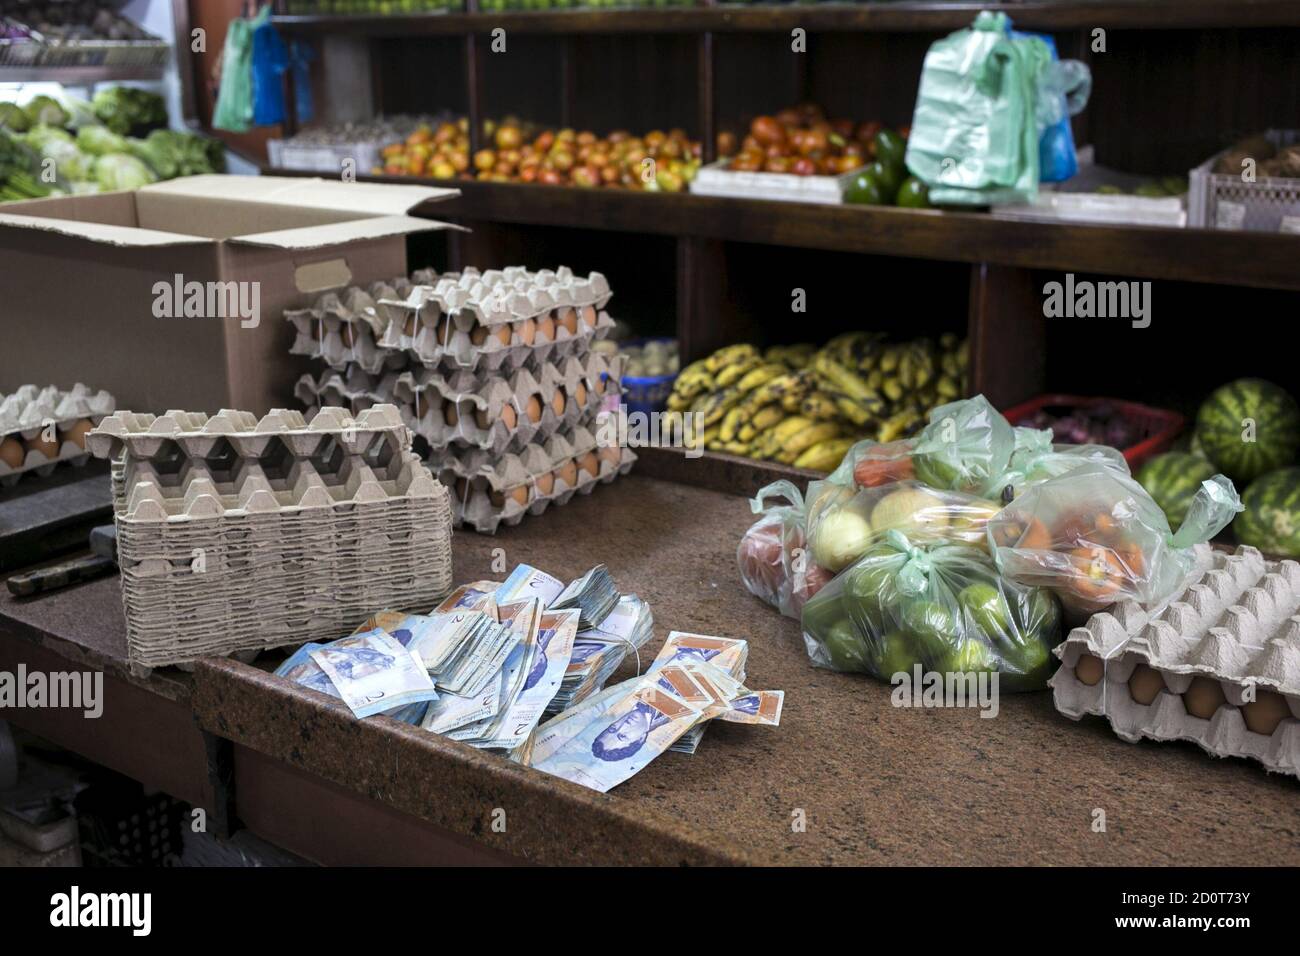 Venezuelan two bolivar banknotes are seen next to some goods at a fruit and vegetable store in Caracas, July 10, 2015. A debilitating recession and a drop in oil prices have harmed the OPEC nation's ability to provide dollars through its complex three-tiered currency control system, pushing up the black market rate at a dizzying speed. The bolivar sank past 600 per U.S. dollar on Thursday, compared with 73 a year ago, according to anti-government website DolarToday. REUTERS/Marco Bello Stock Photo